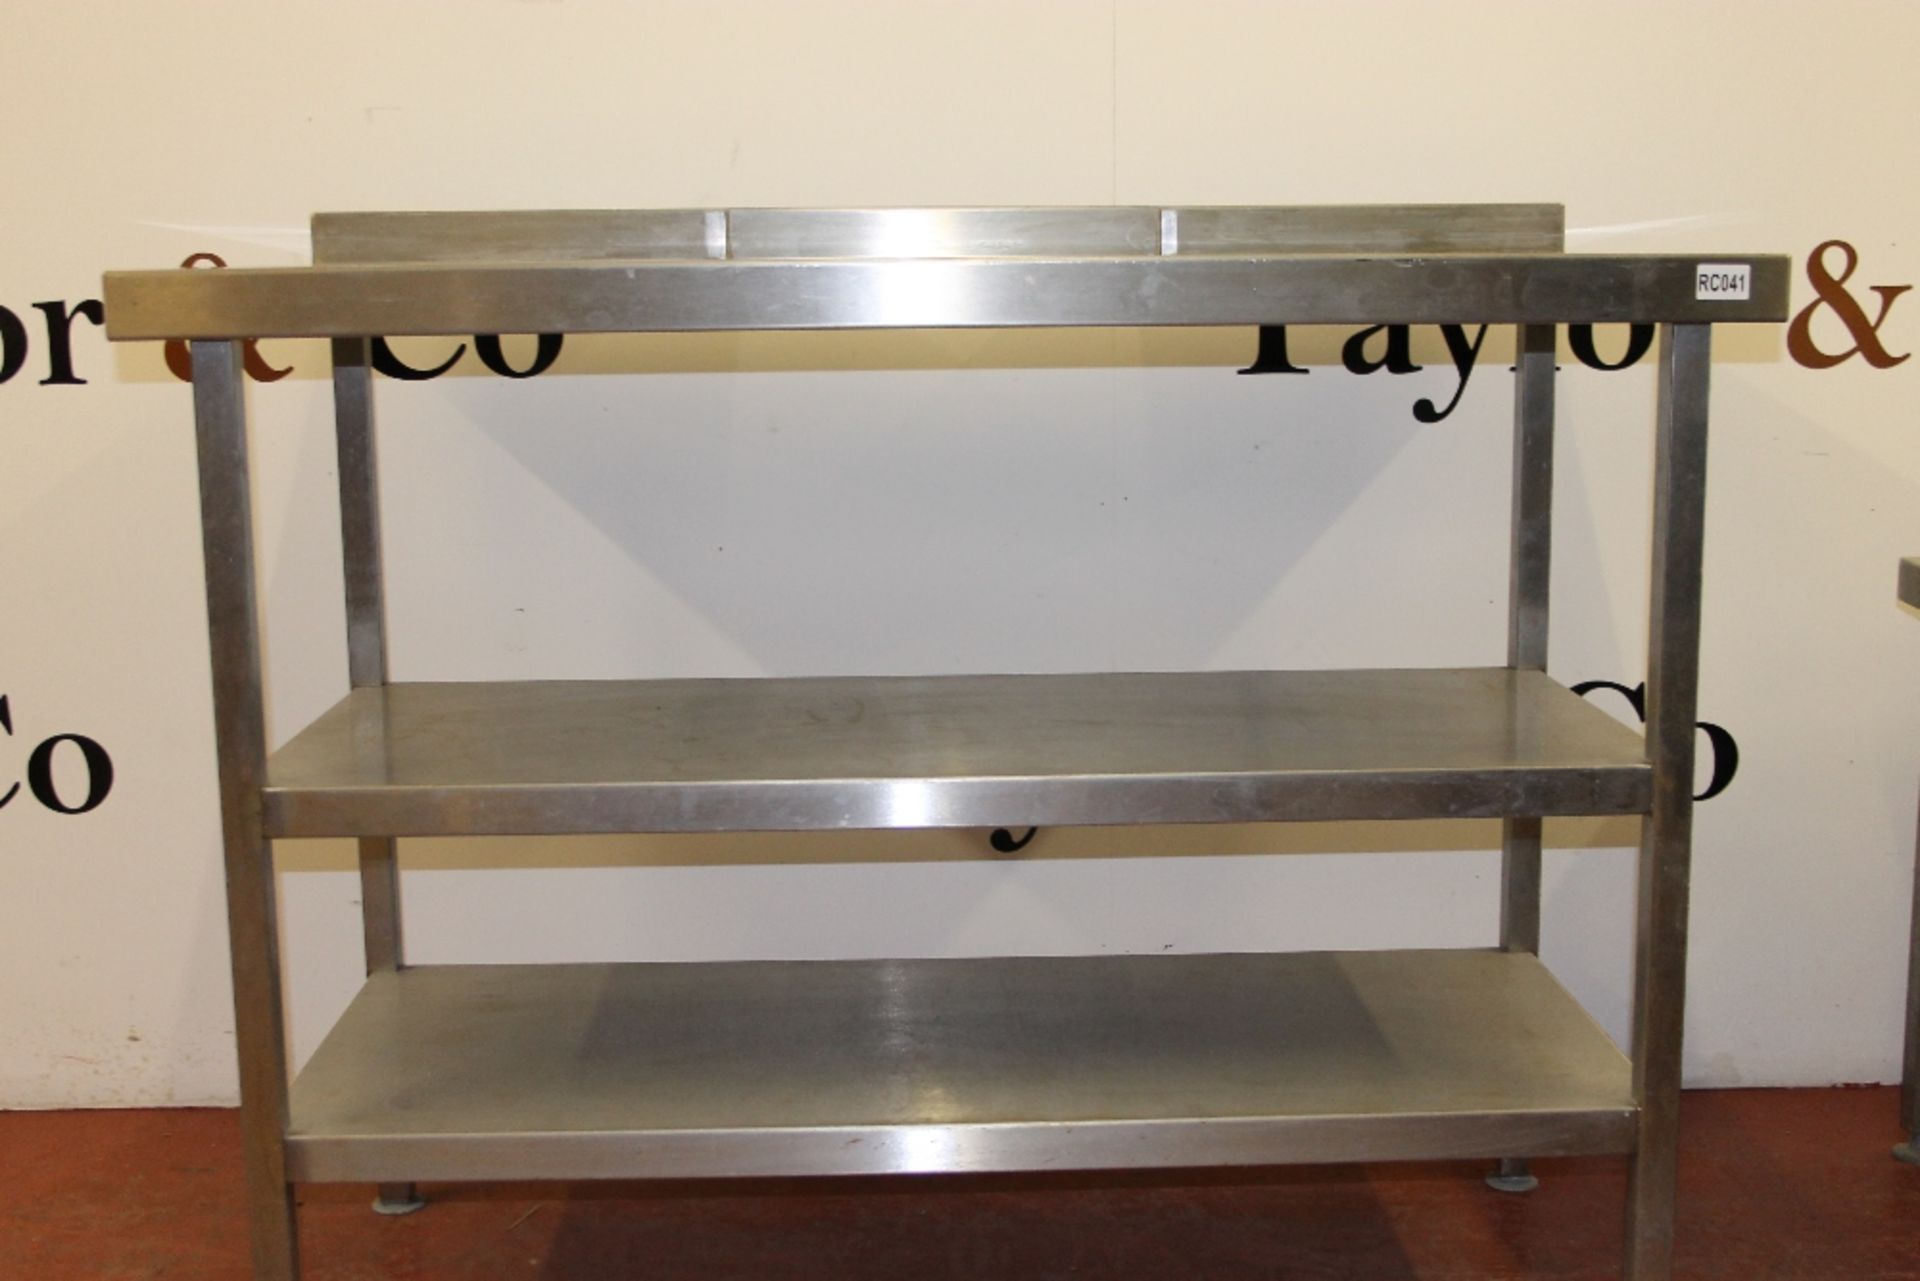 Stainless Steel Table with 2 Under Shelves W120cm x H95cm x D62cm